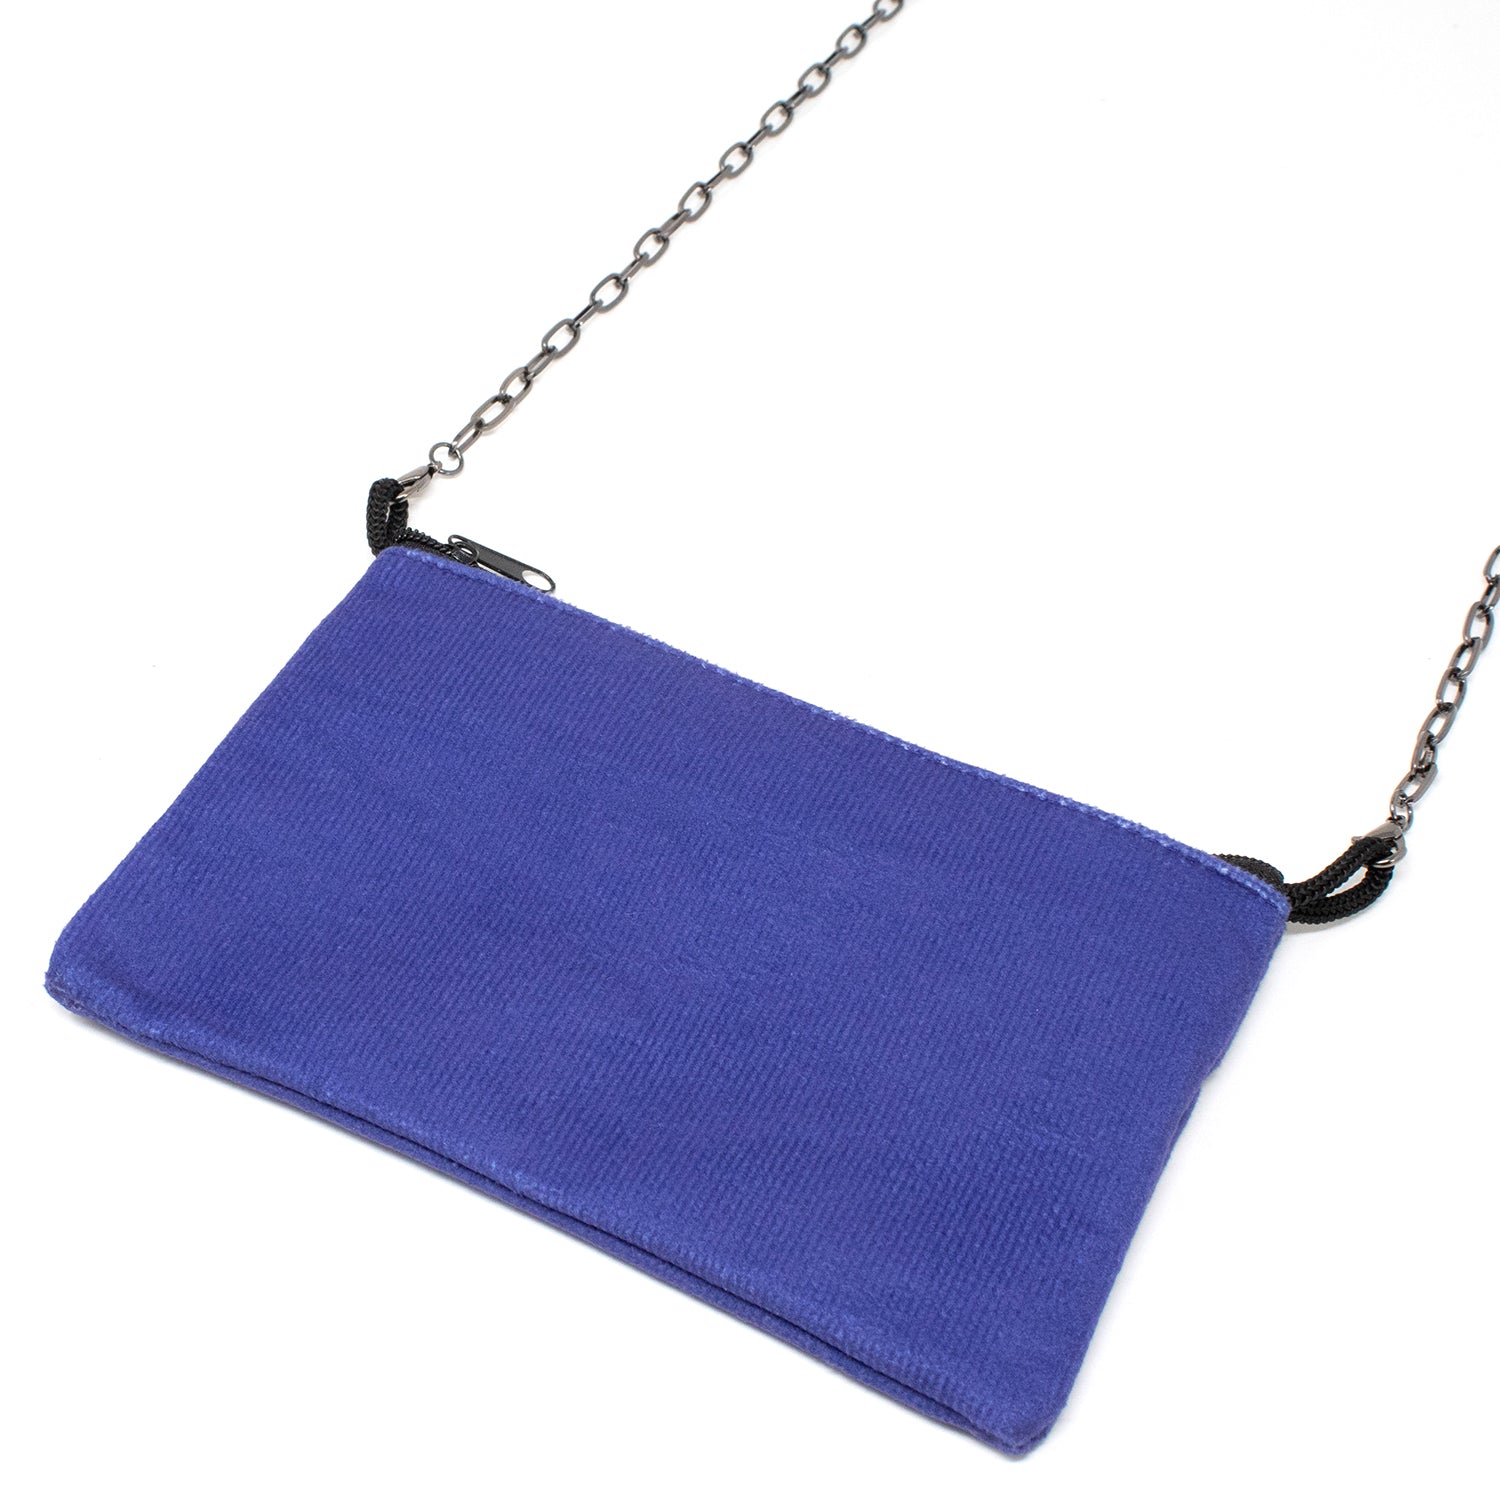 Mask Pouch and Lanyards holds your mask in a safe, enclosed pouch you can easily hang around your neck. Great for work, home, jogging, cleaning - any place you need your mask out of they way. Purple pouch with silver chain.